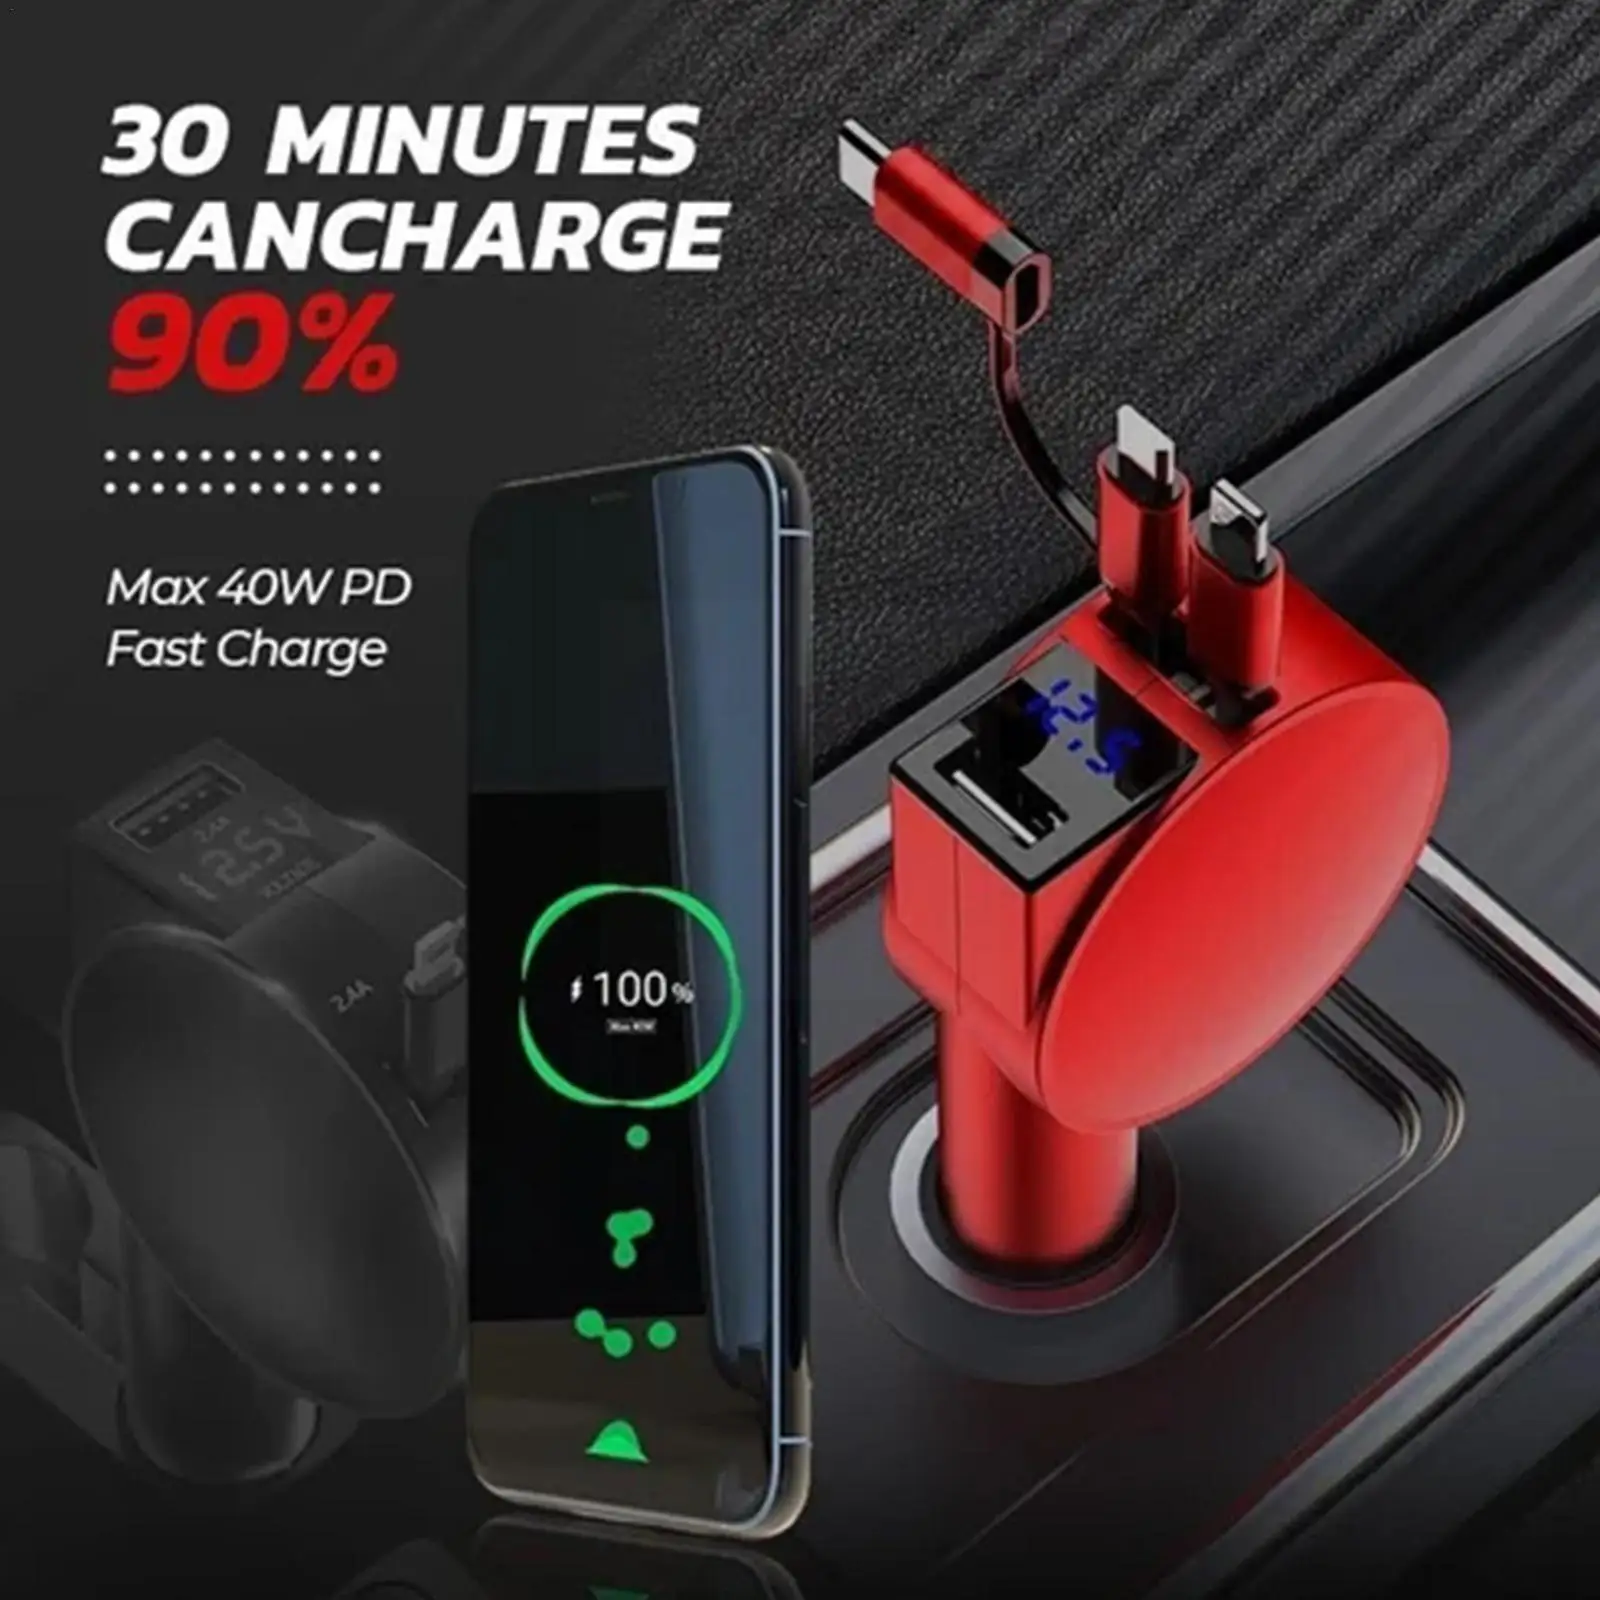 

3-in-1 Retractable Fast Charging Car Adapter Car Charger Car USB Socket QC4.0+PD Fast Charge For iPhone Android Type-C Phon F8W0